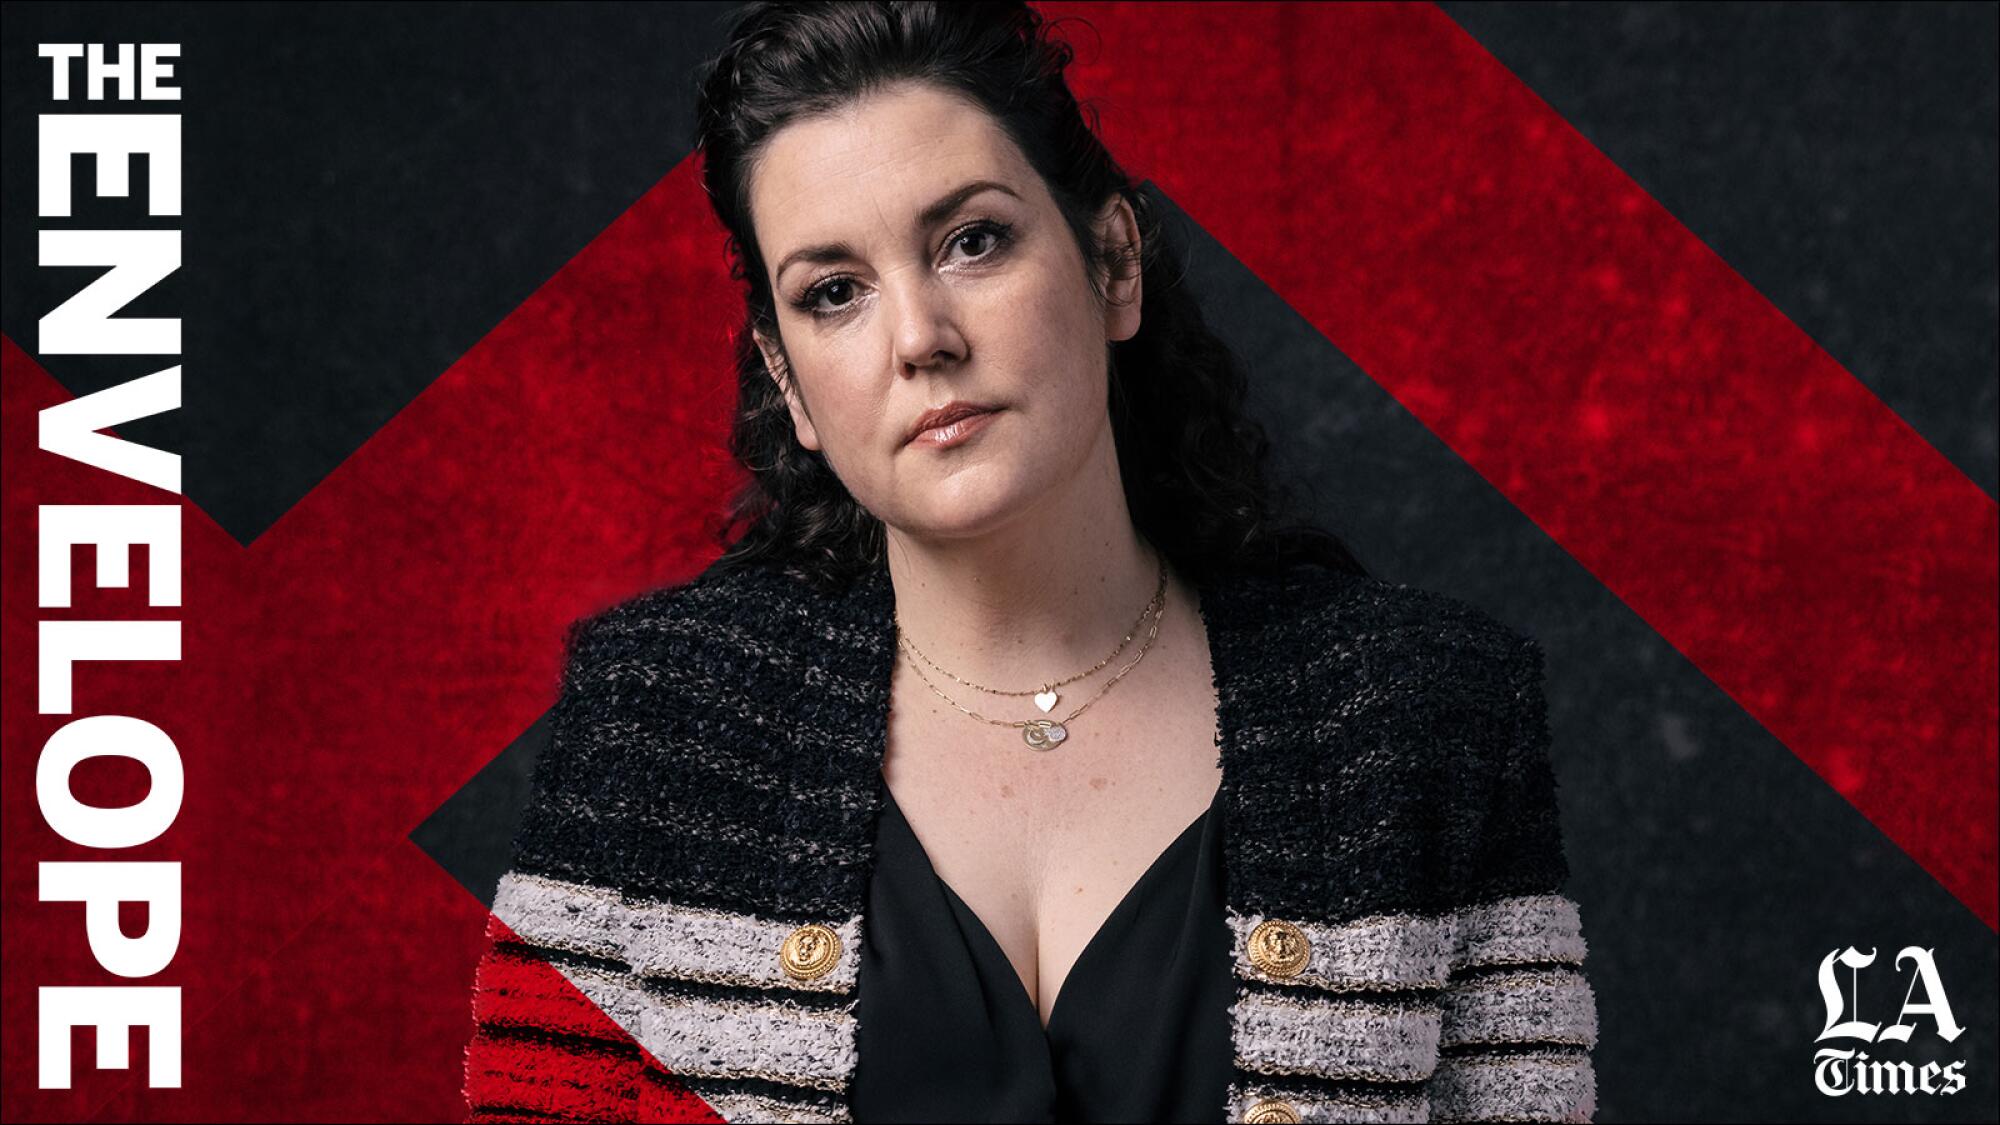 Melanie Lynskey Made Her The Last Of Us Character Delicate On Purpose - IMDb